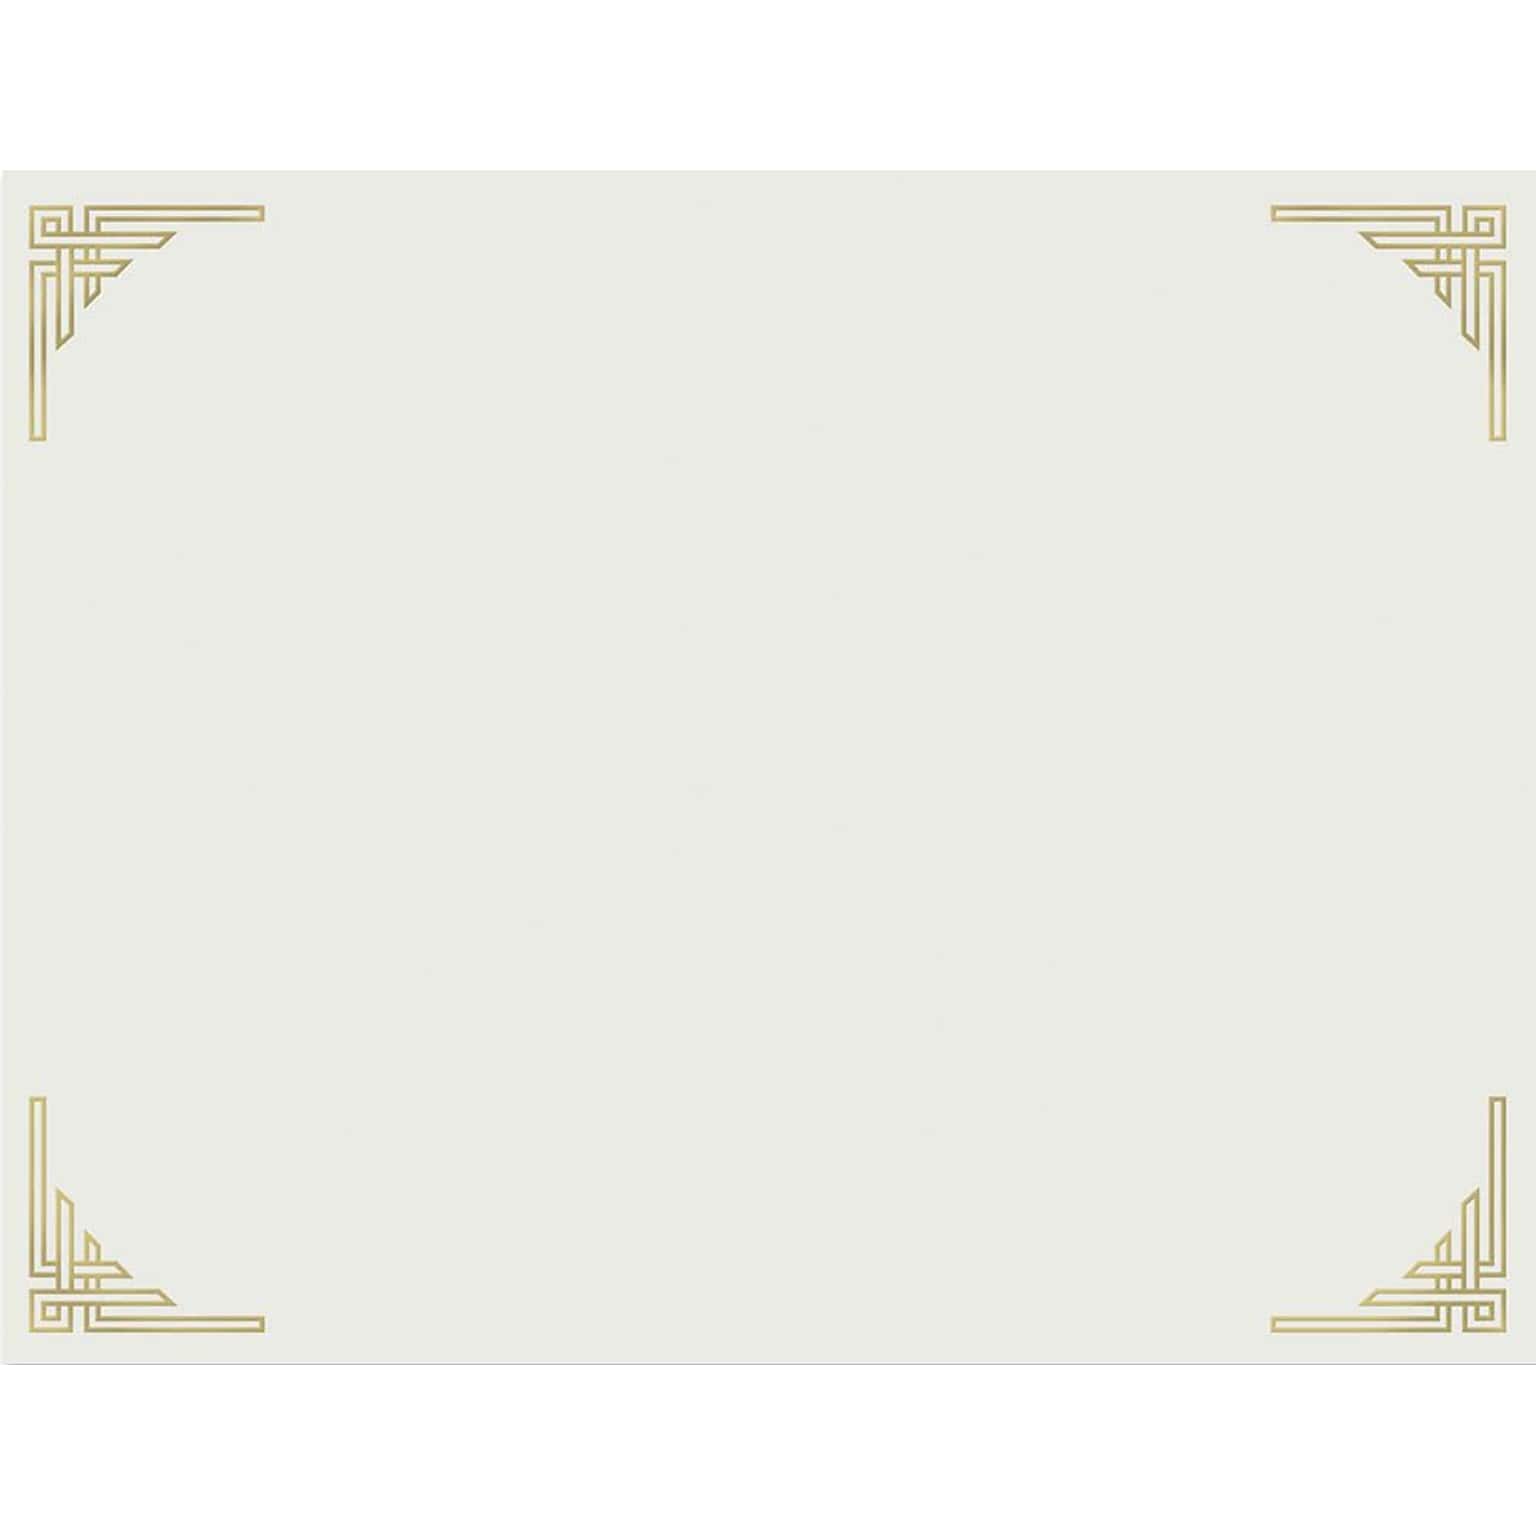 Great Papers Certificates, 8.5 x 11, Gold, 12/Count (963008)